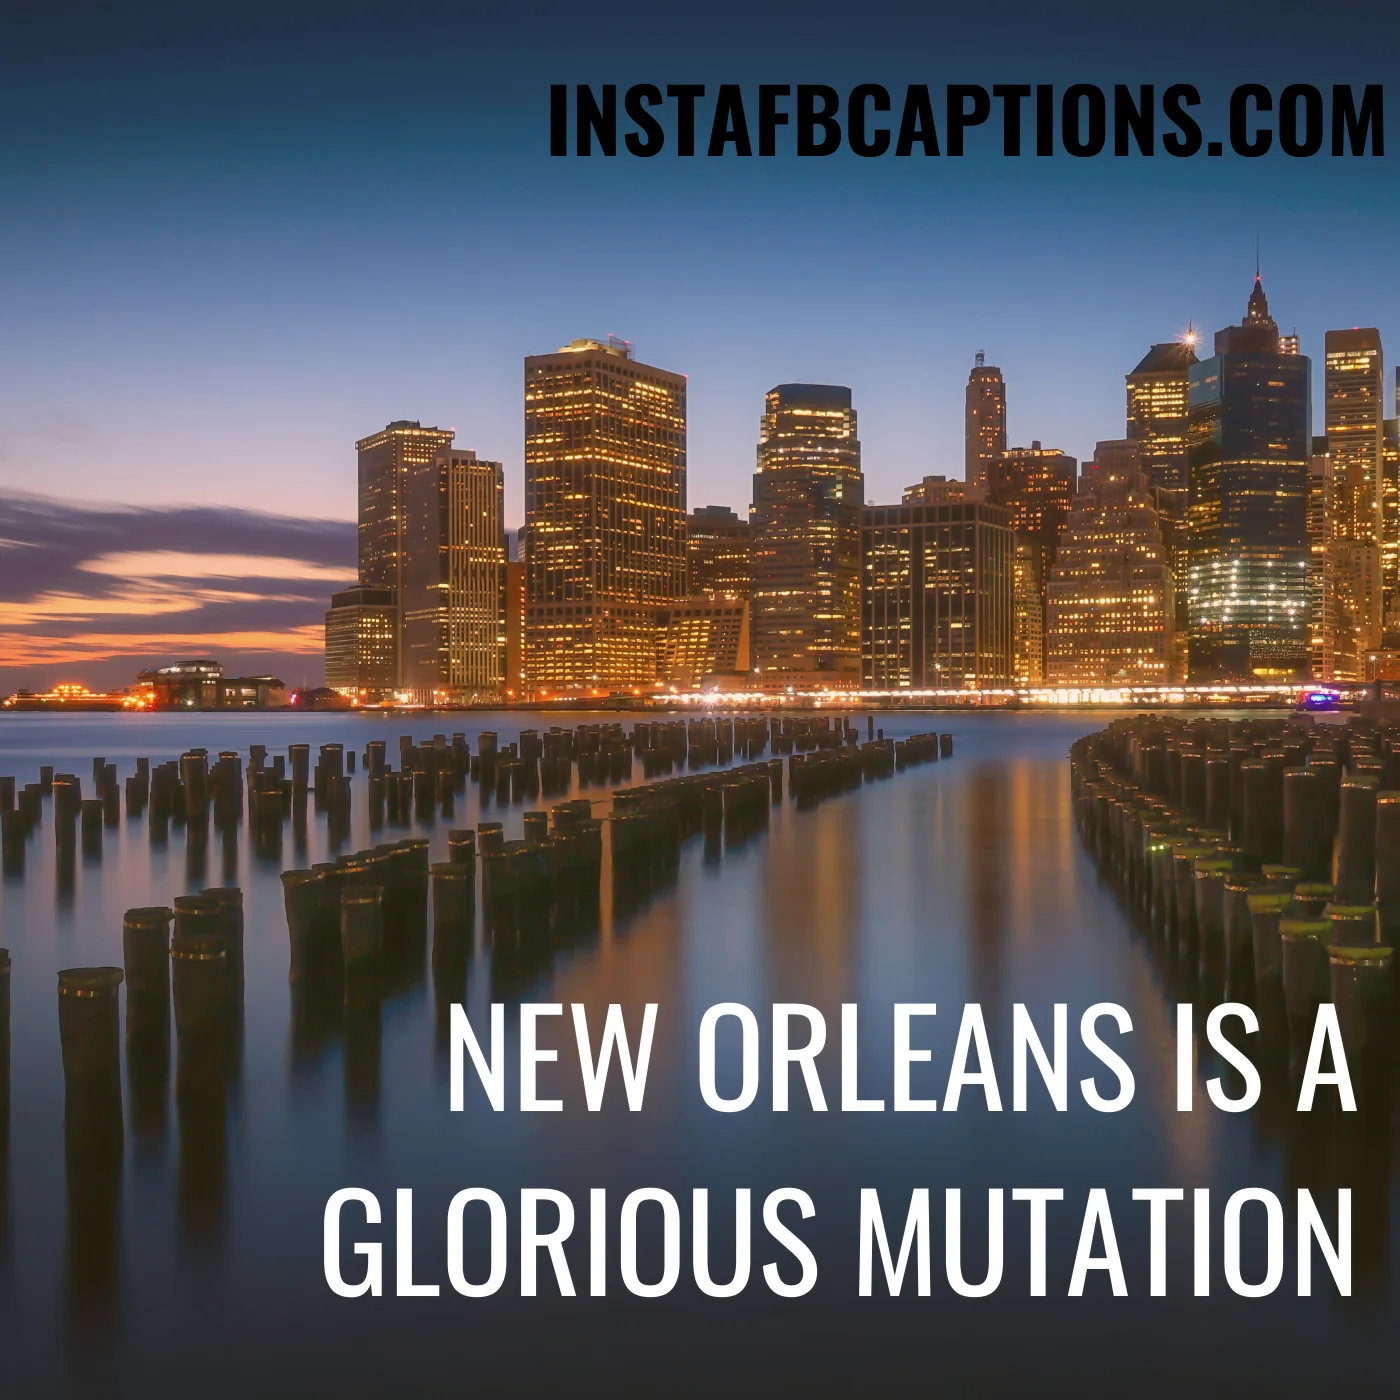 New Orleans Travel Captions  - New Orleans Travel Captions - Funny New Orleans Captions Quotes for Instagram Posts in 2023